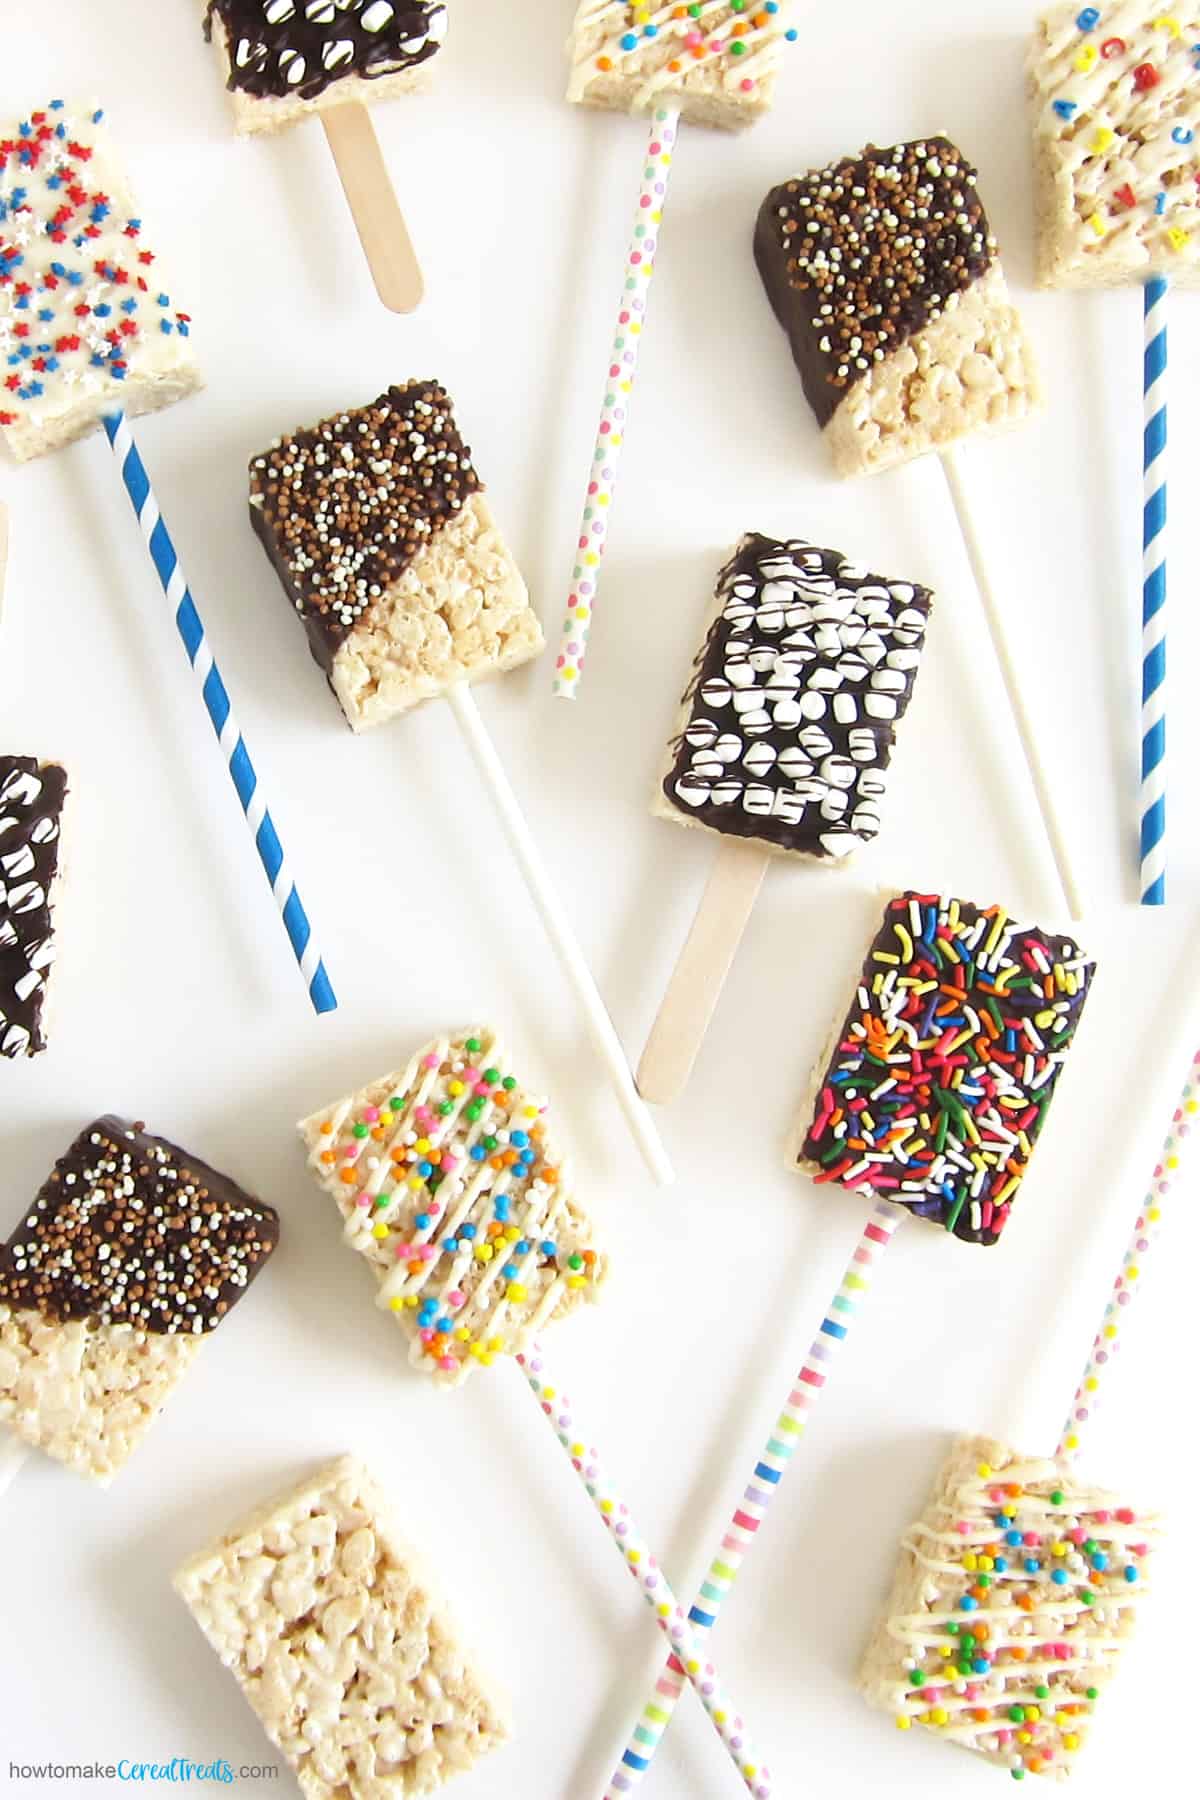 A variety of Rice Krispie Treat pops on a stick.